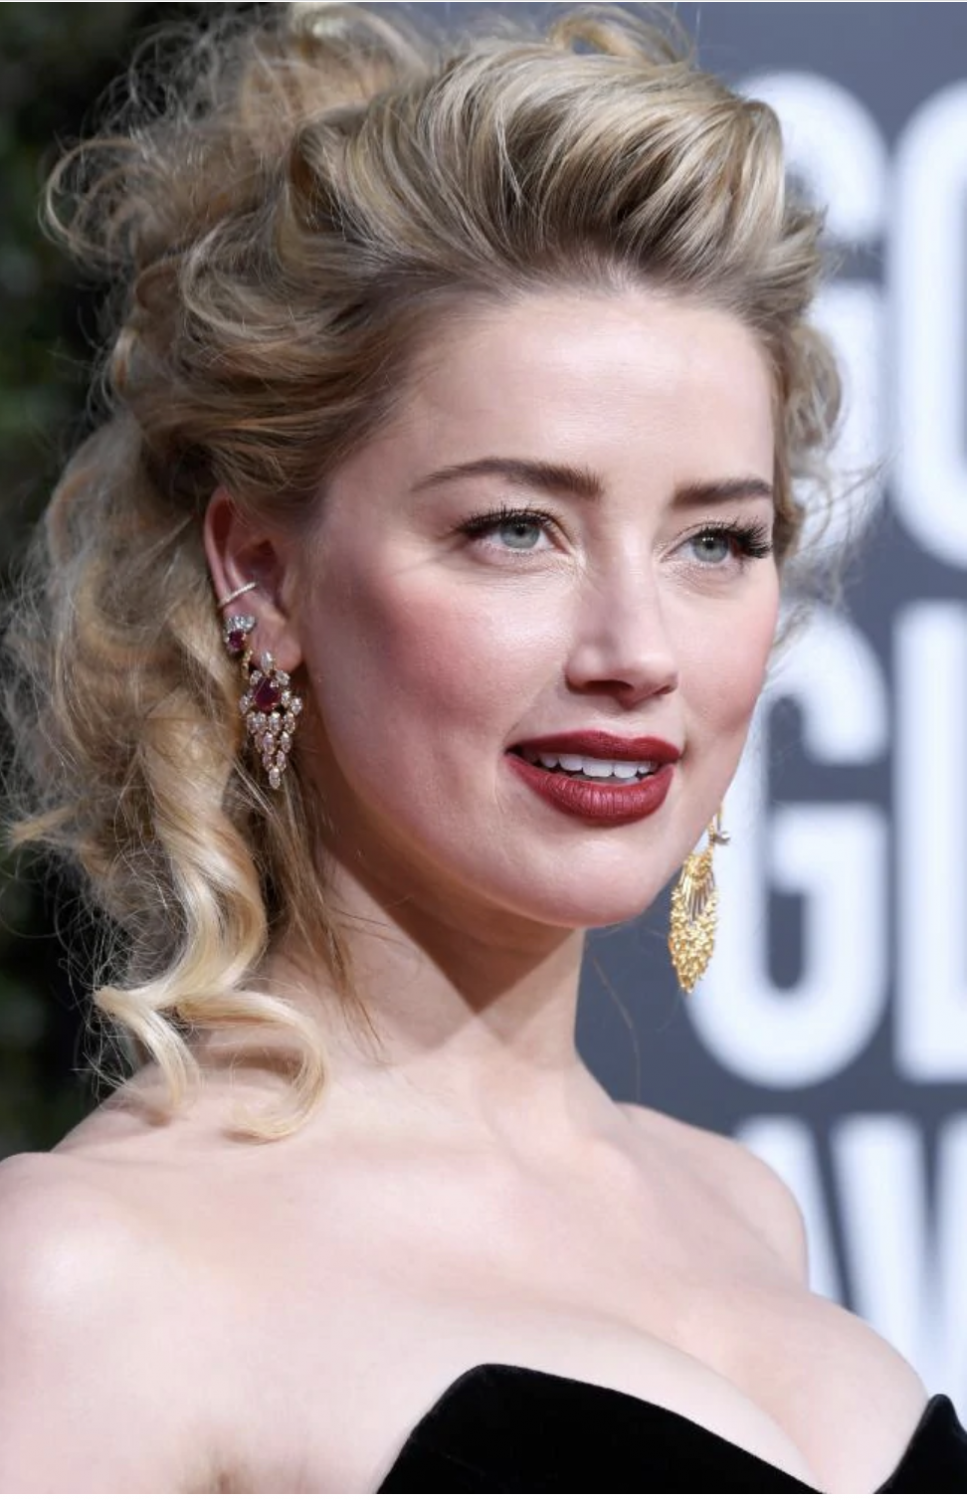  Amber Heard had a brief fling with Musk. Picture: Frazer Harrison/Getty ImagesSource:Getty Images